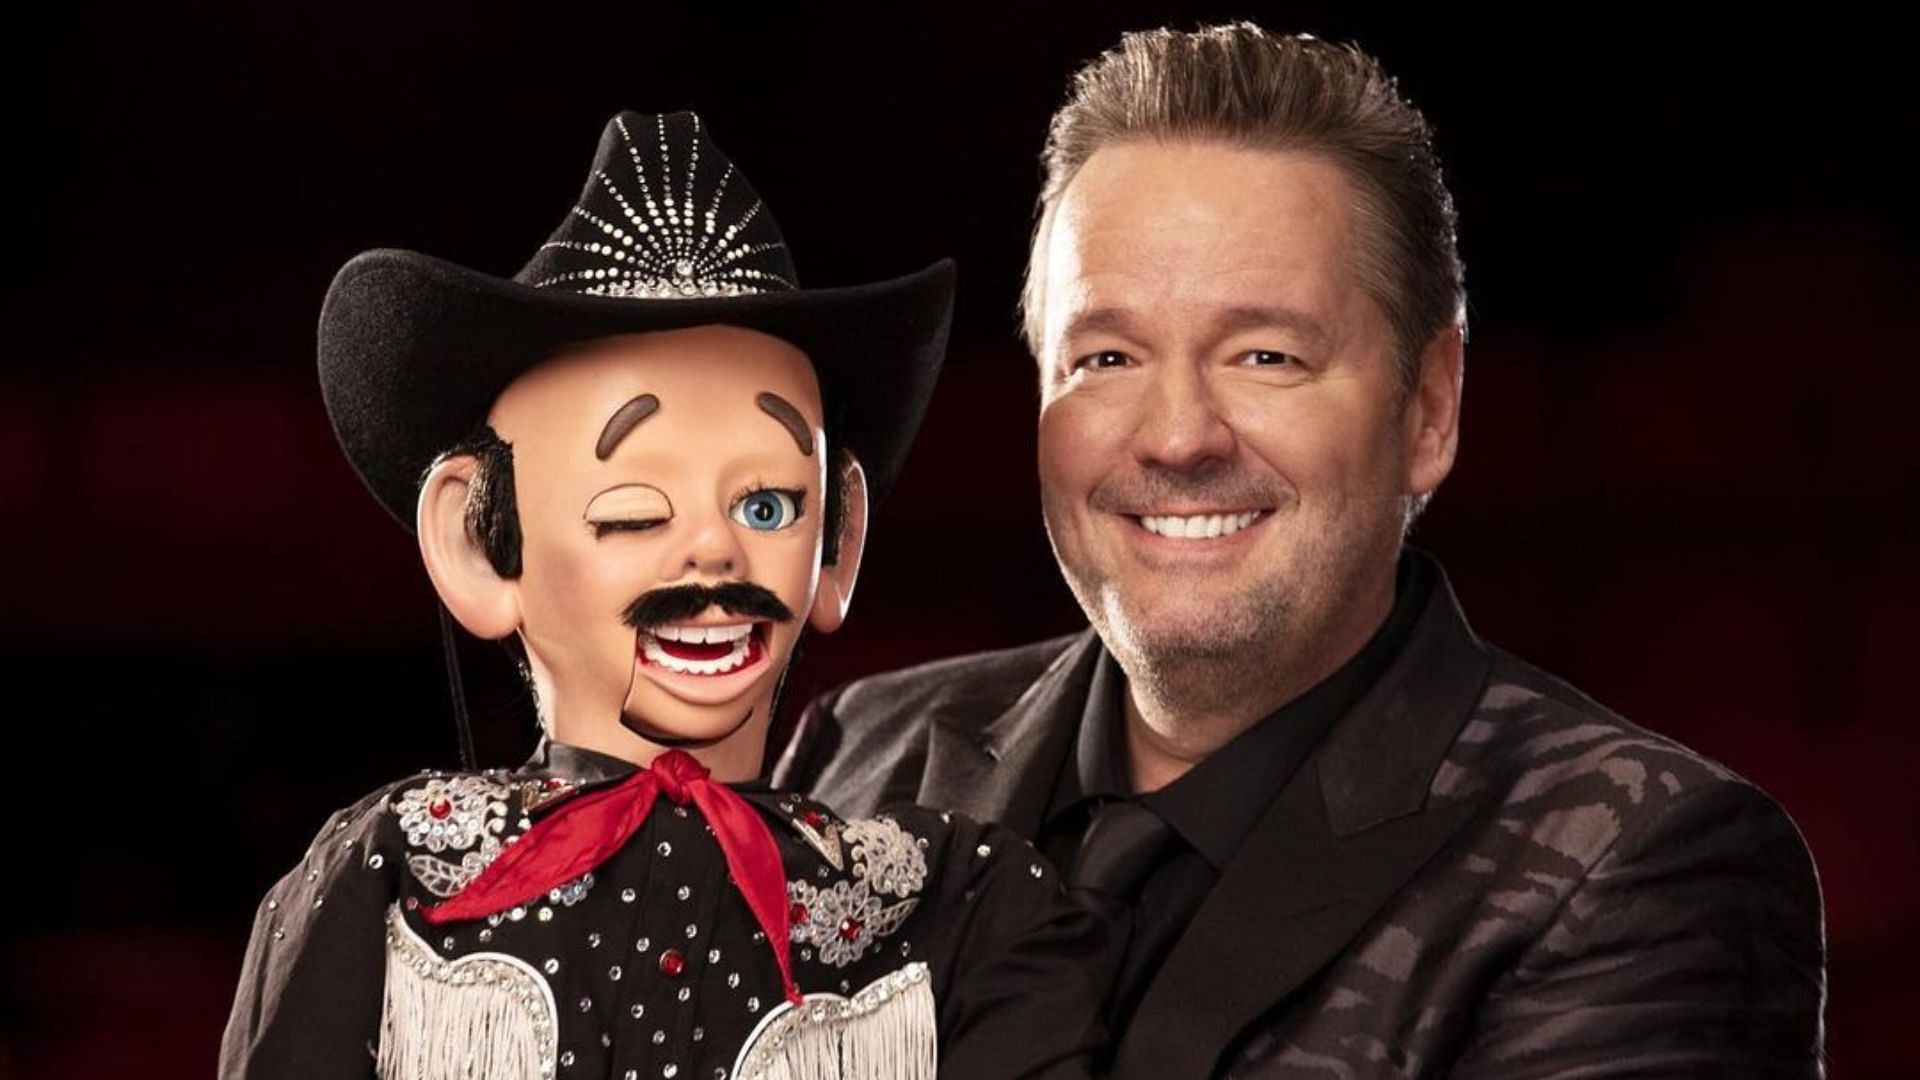 Ventriloquist Terry Fator is set to participate on AGT: All Stars